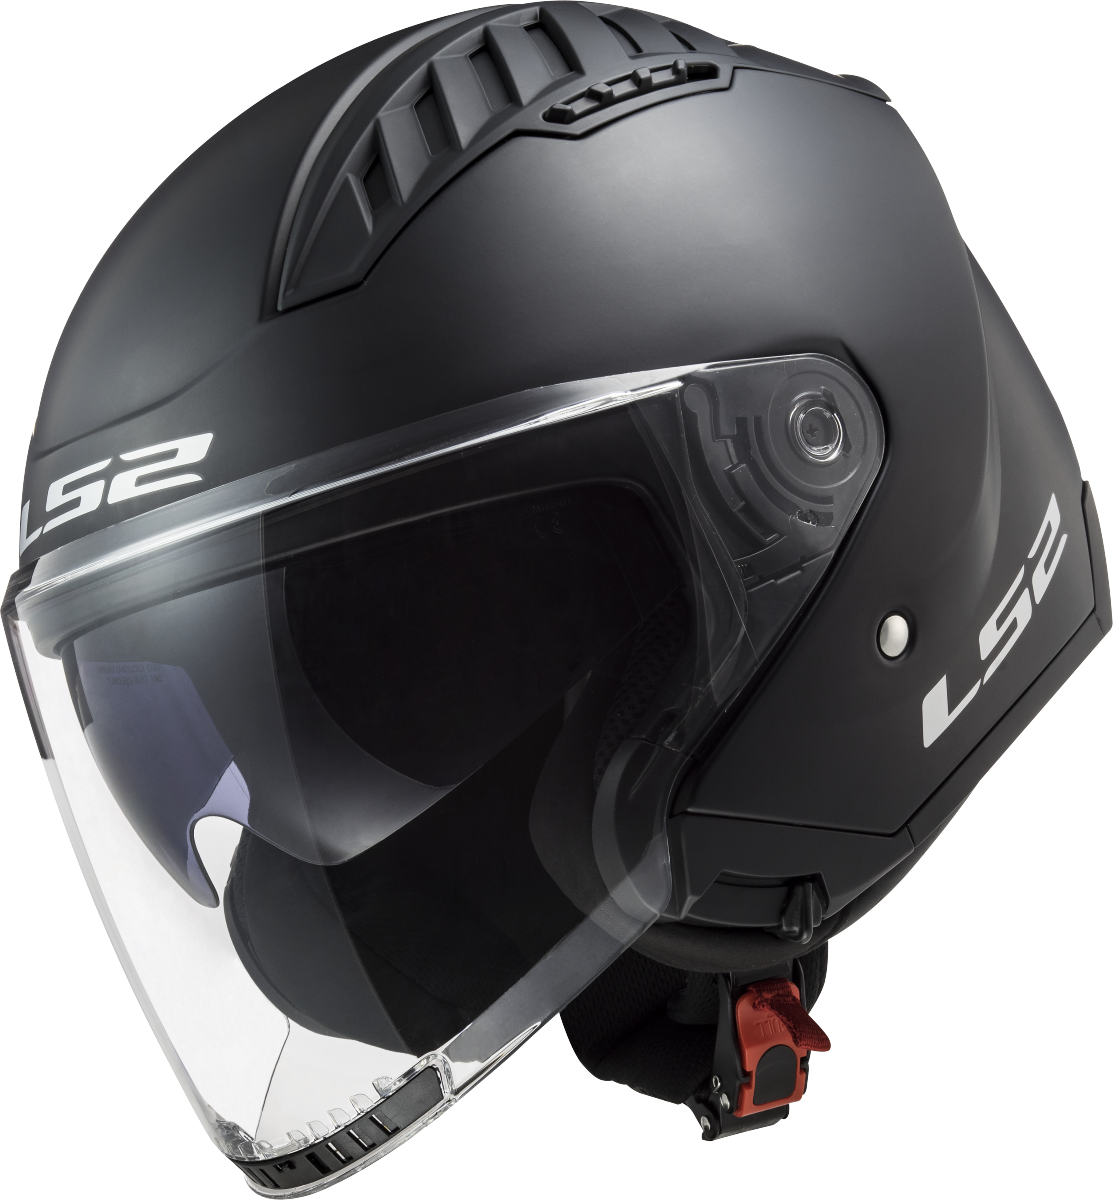 Casco LS2 OF600 COPTER SOLID NEGRO MATE 4